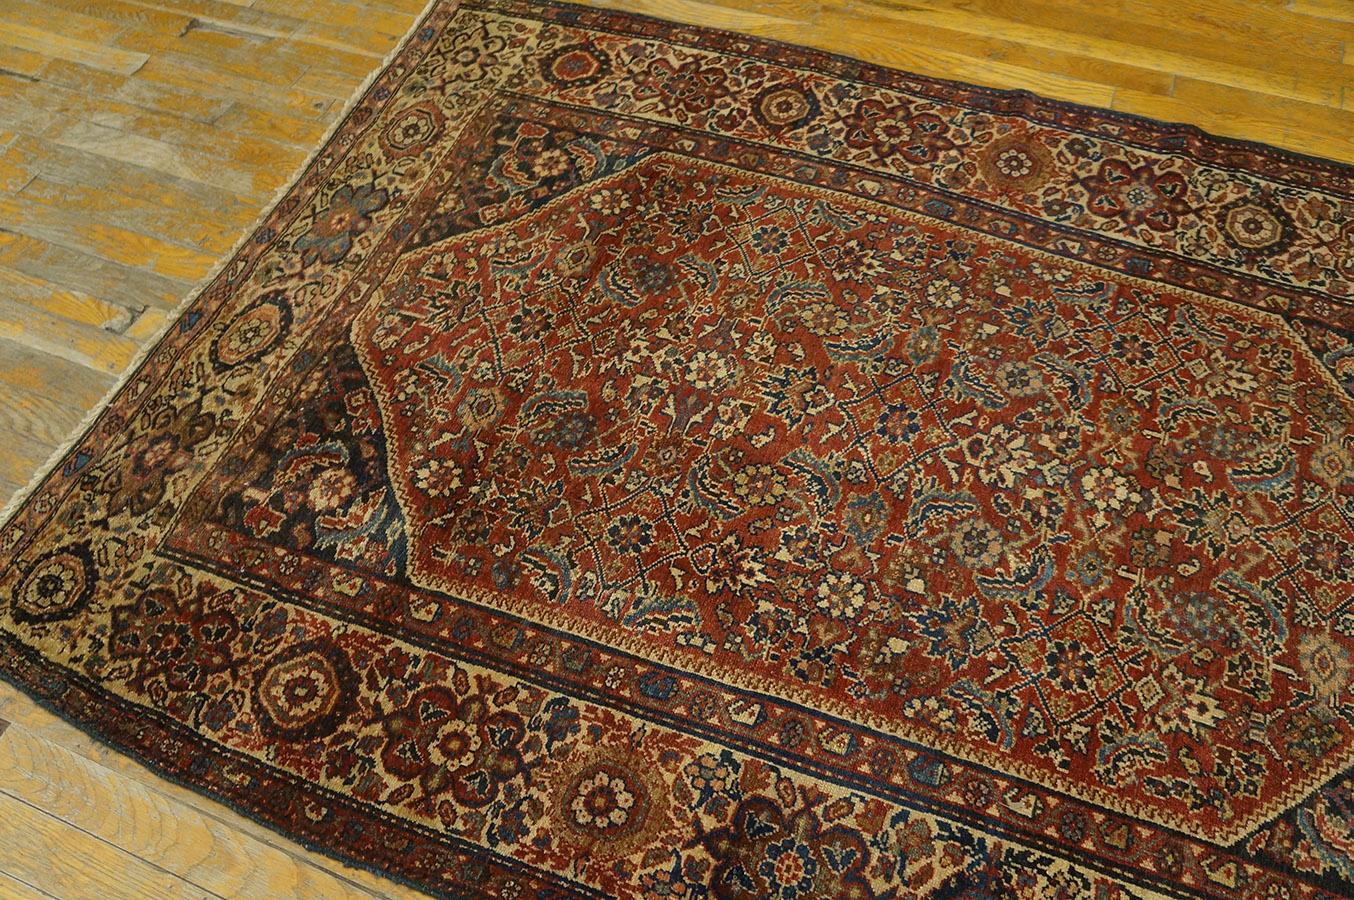 Early 20th Century Persian Malayer Carpet ( 4'3